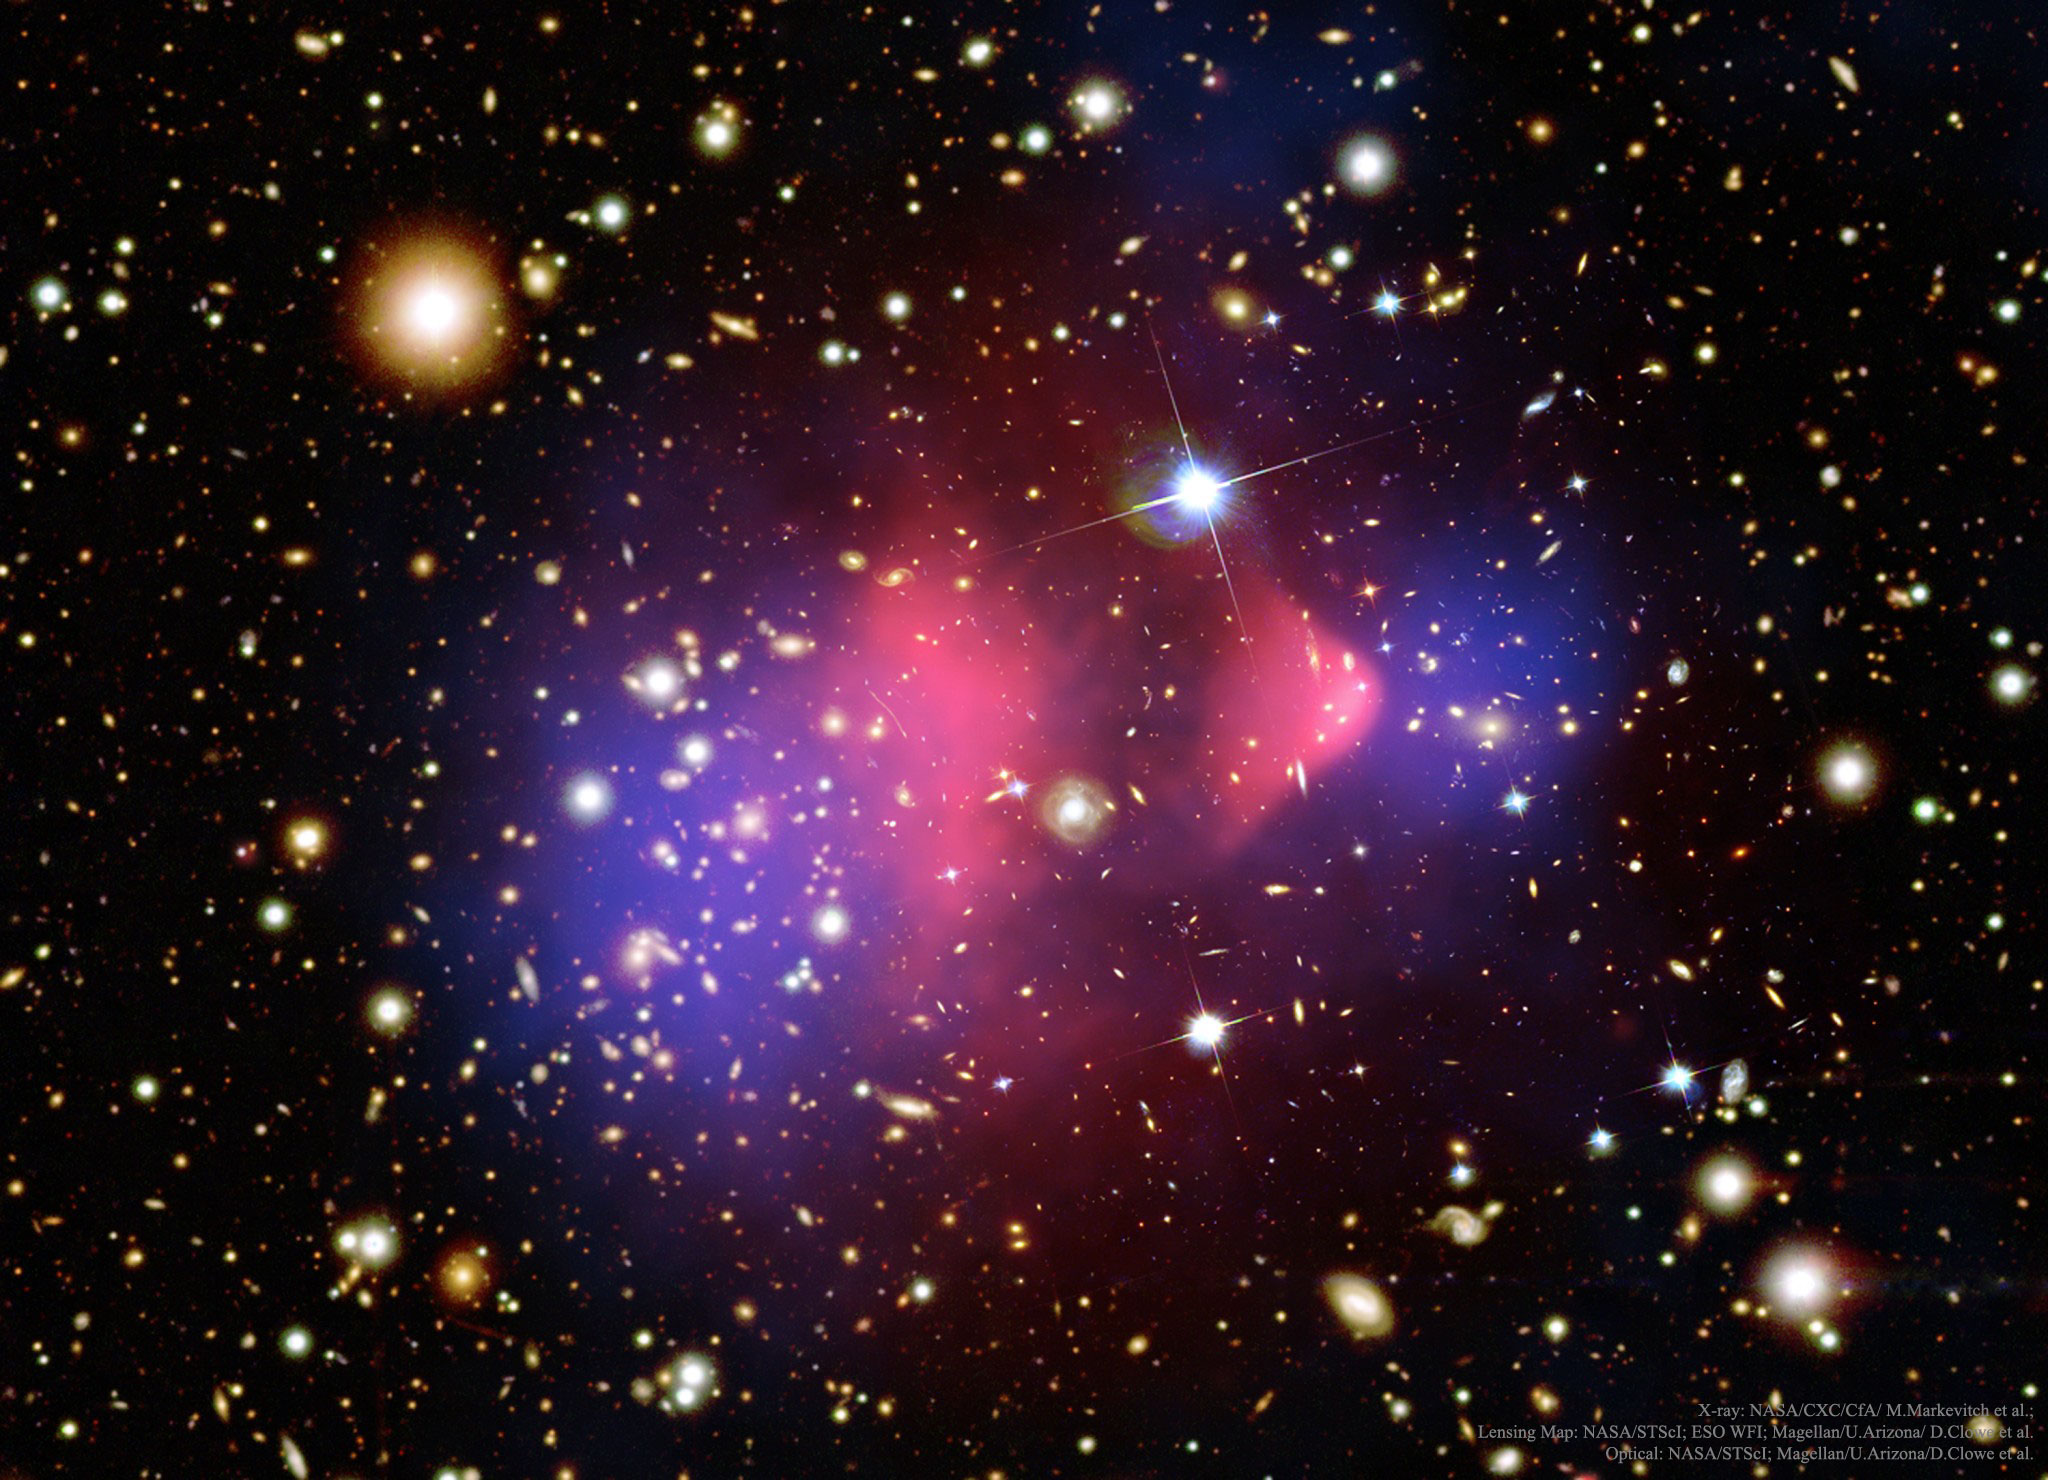 Astronomy Picture of the Day - Σελίδα 2 Bulletcluster_comp_2048